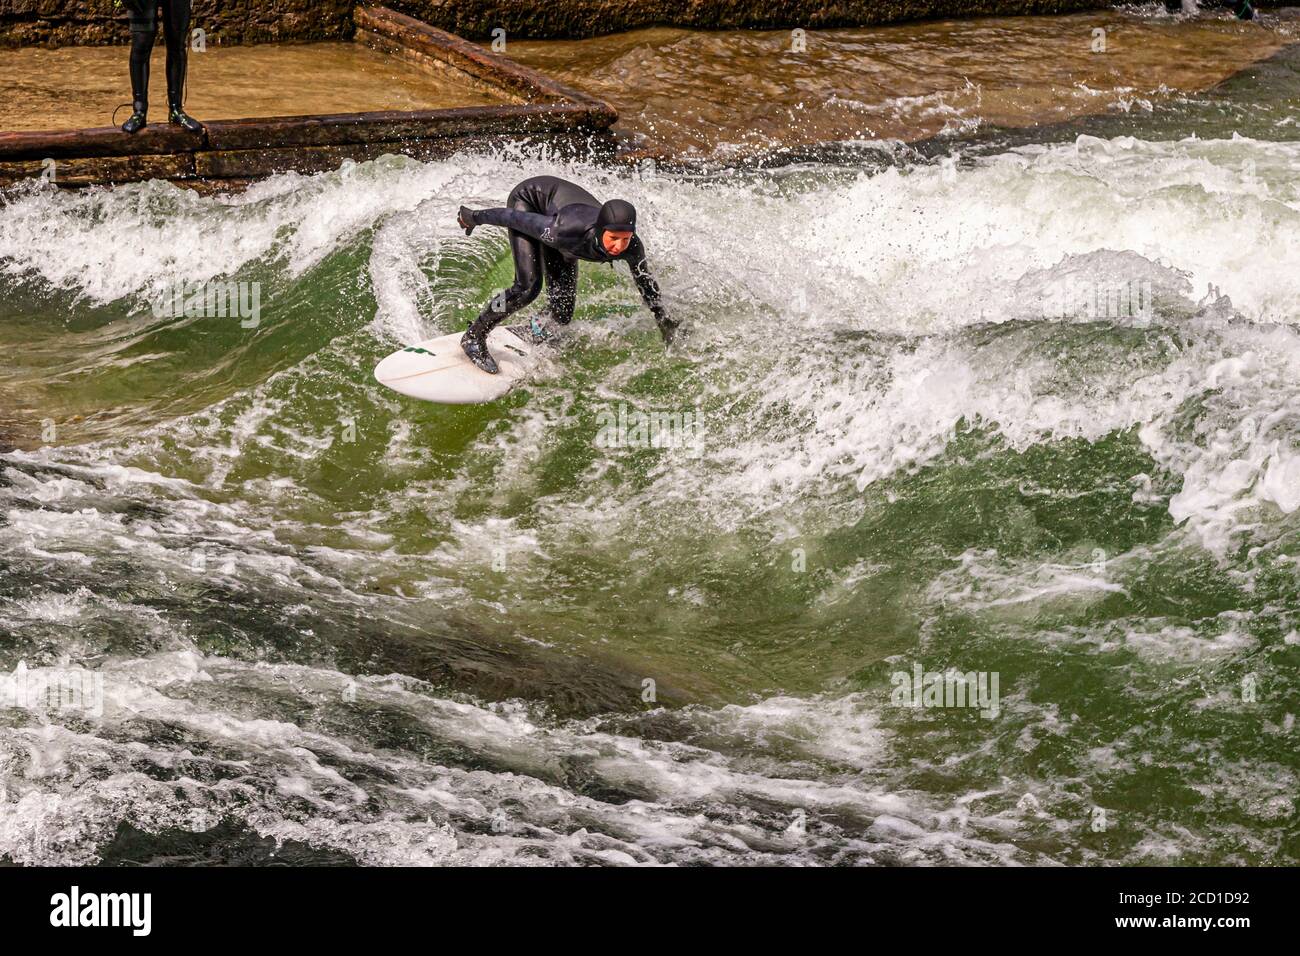 River-Surfing on the Eisbach in Munich, Germany. The standing wave can be surfed for as long as one's balance holds, and in busy times a queue of surfers forms on the bank Stock Photo